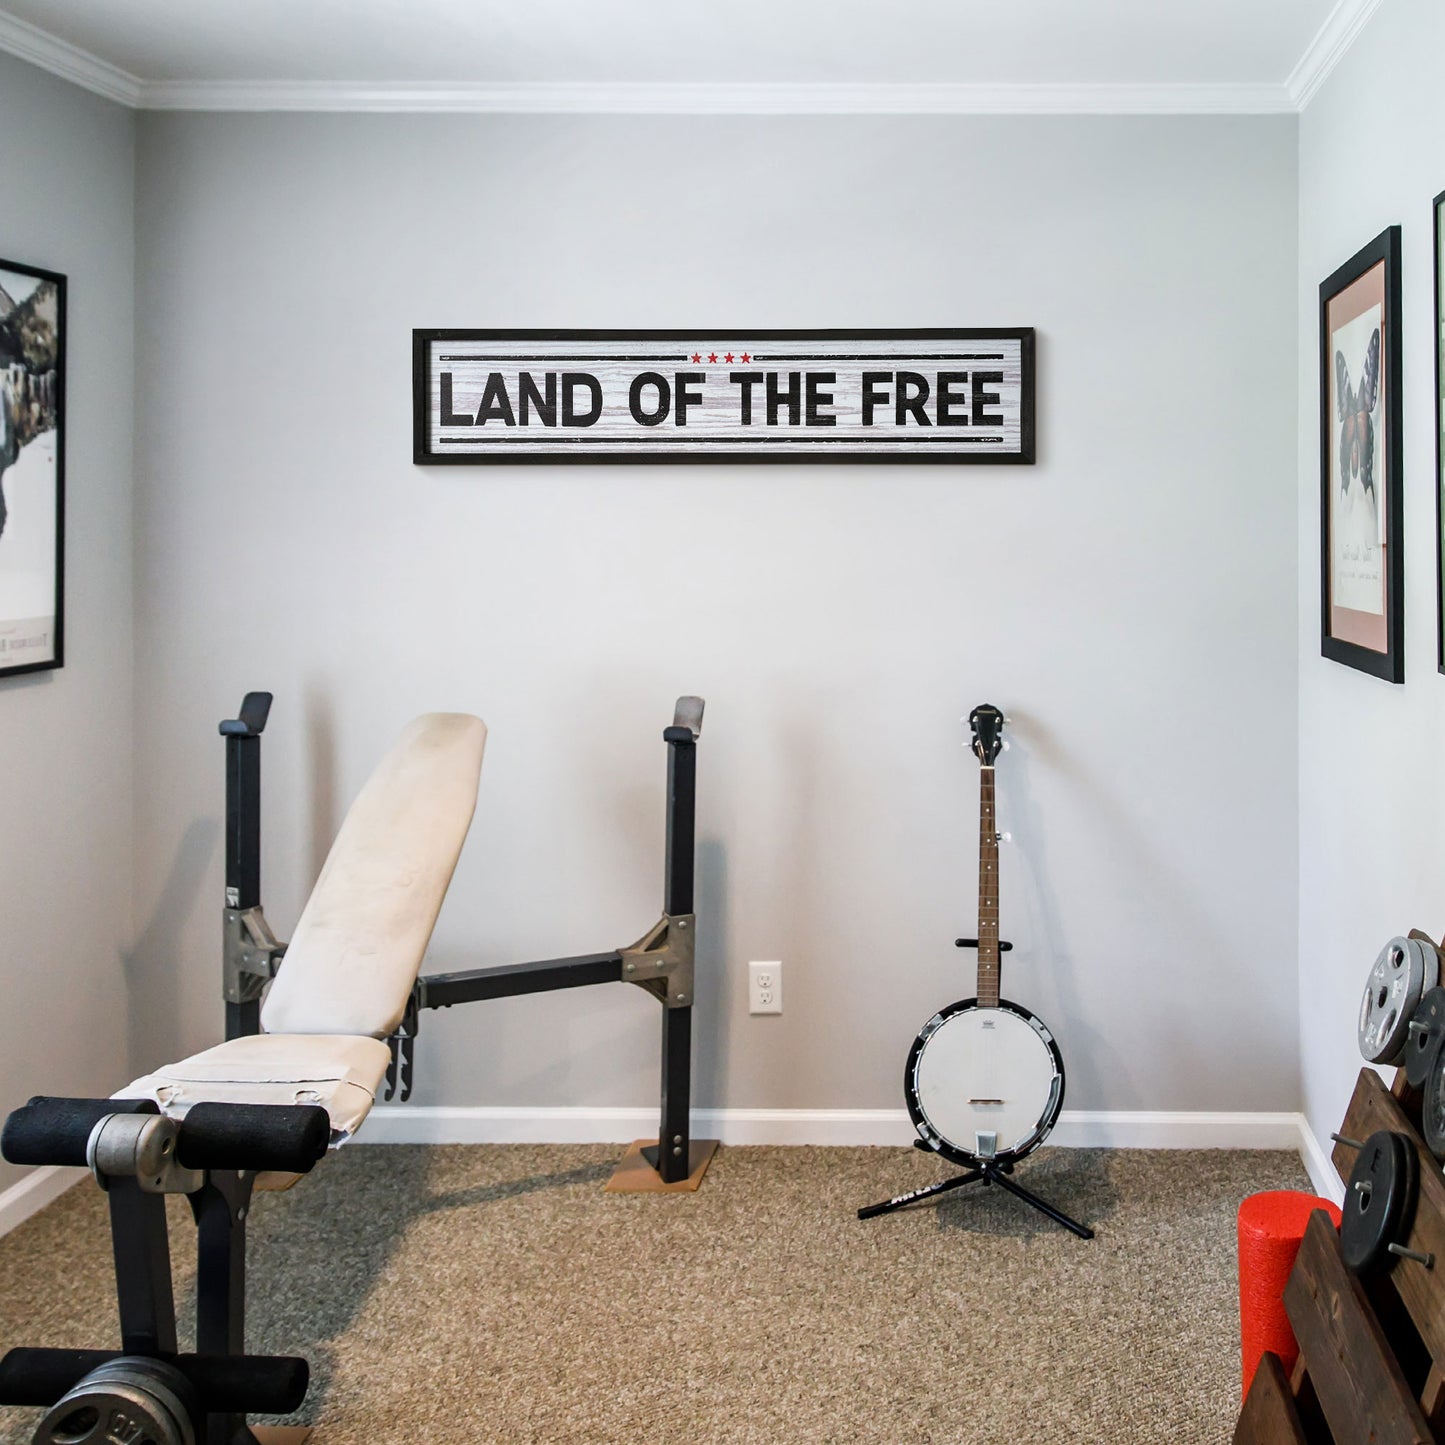 Land Of The Free Novelty Wall Sign - 36" x 8"